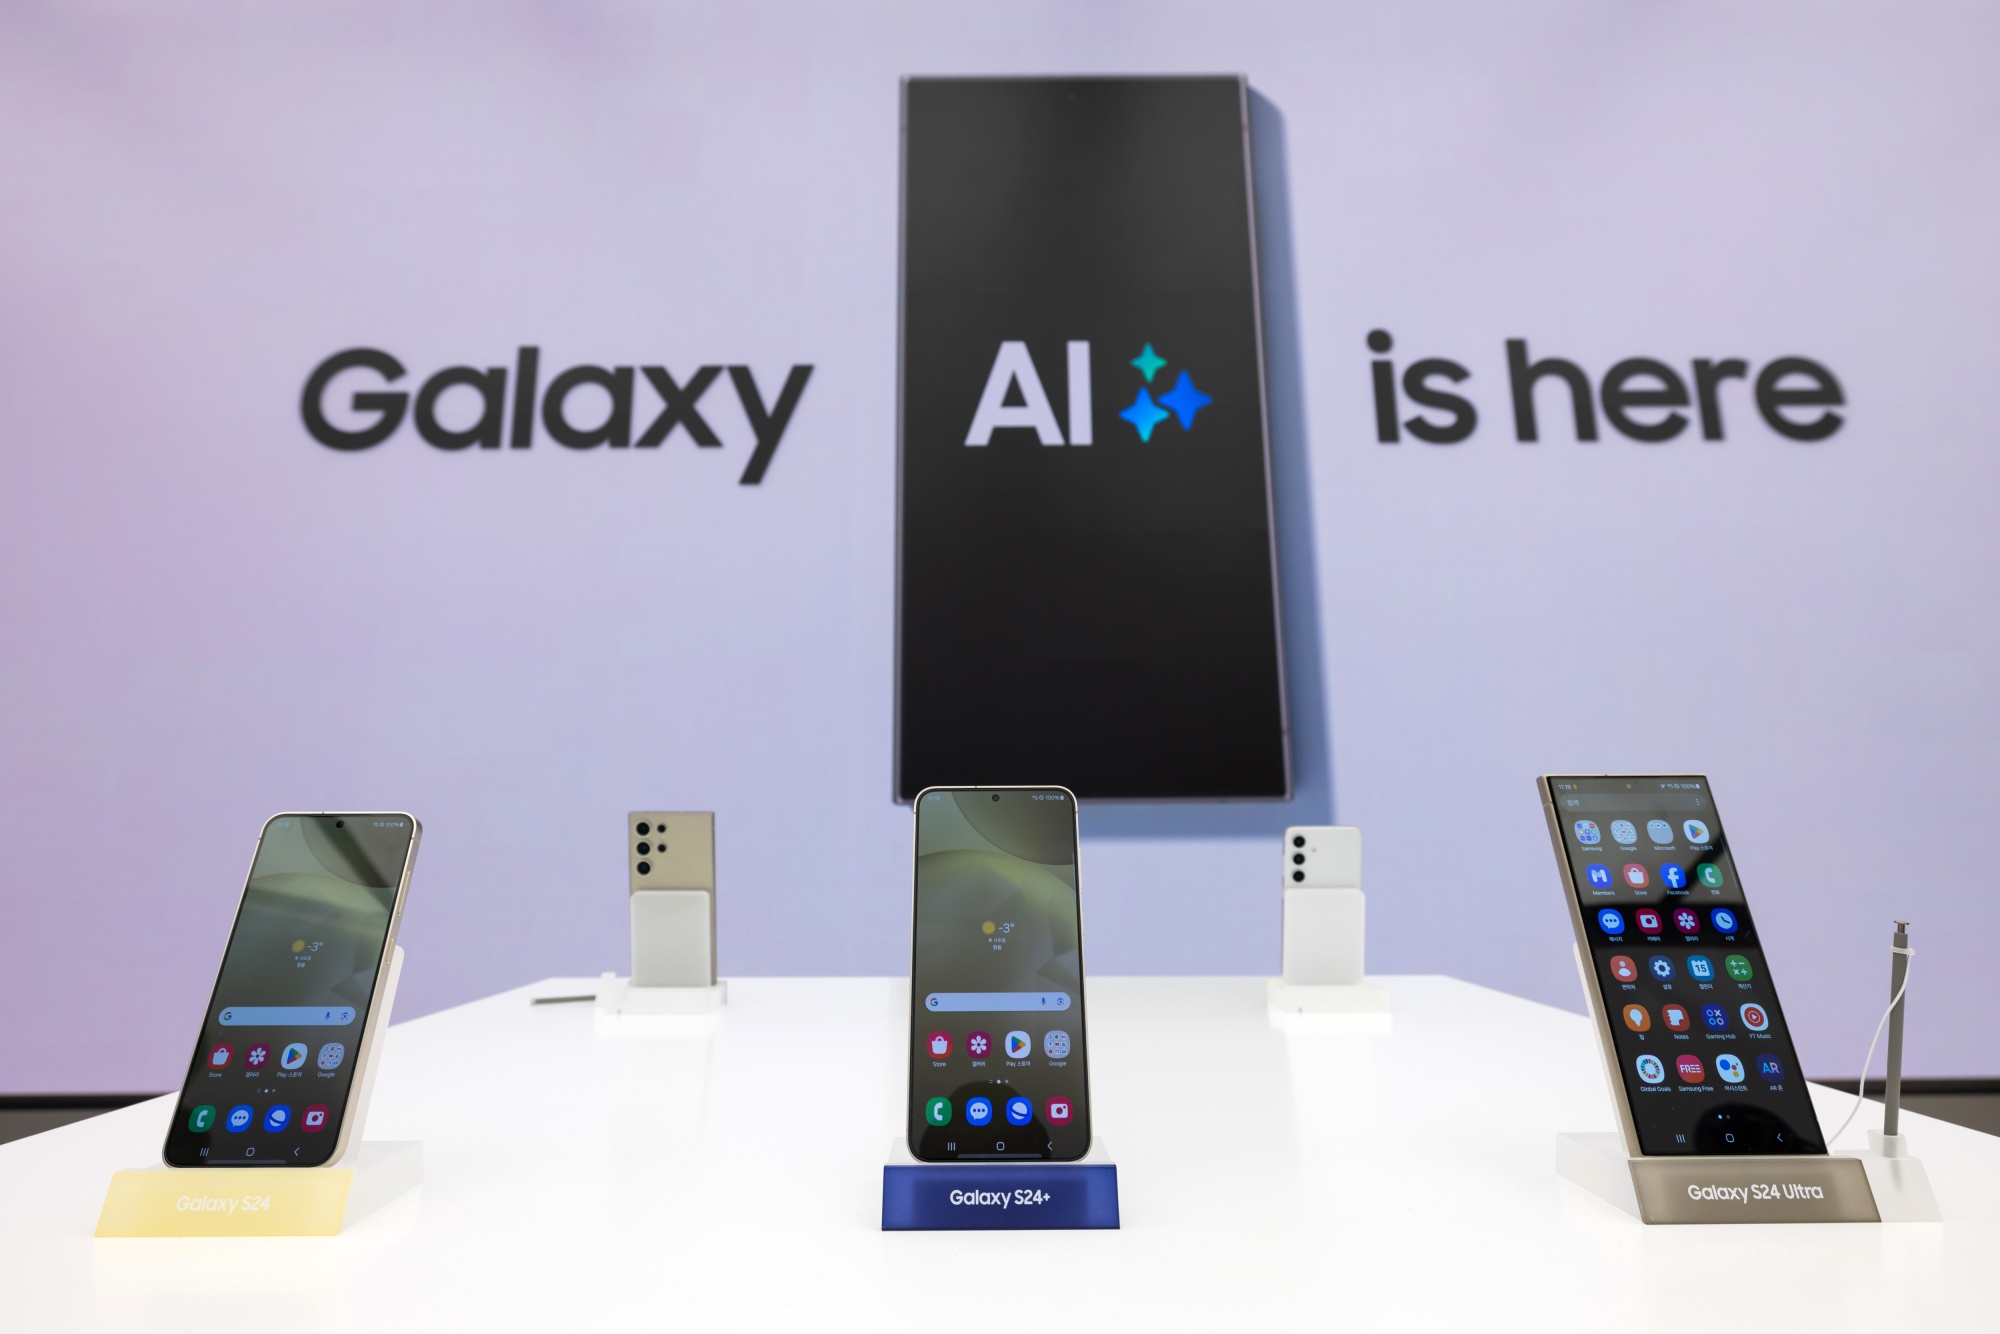 Galaxy AI will be available on 200 million devices by the end of 2024